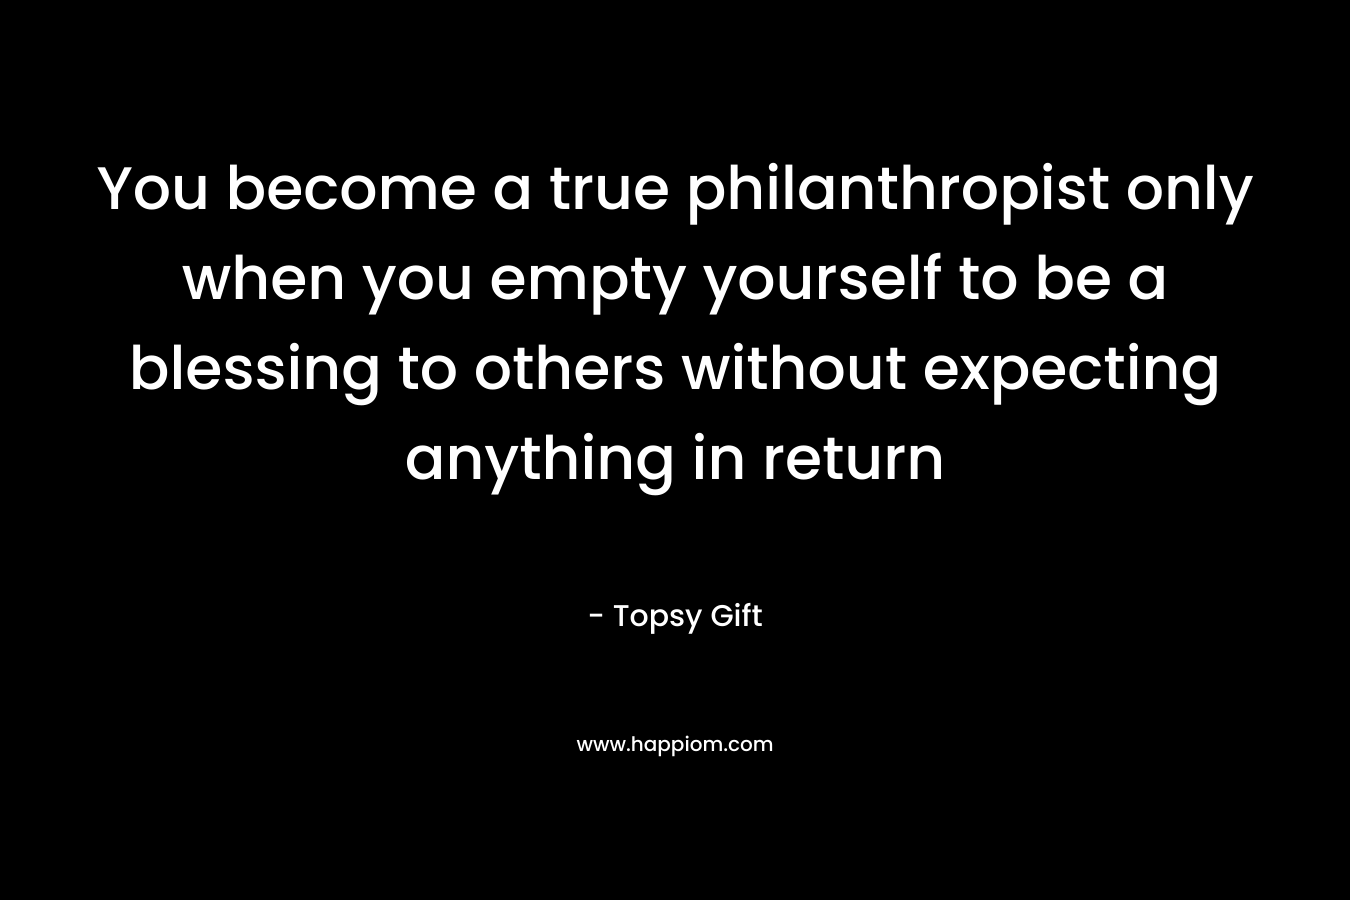 You become a true philanthropist only when you empty yourself to be a blessing to others without expecting anything in return – Topsy Gift